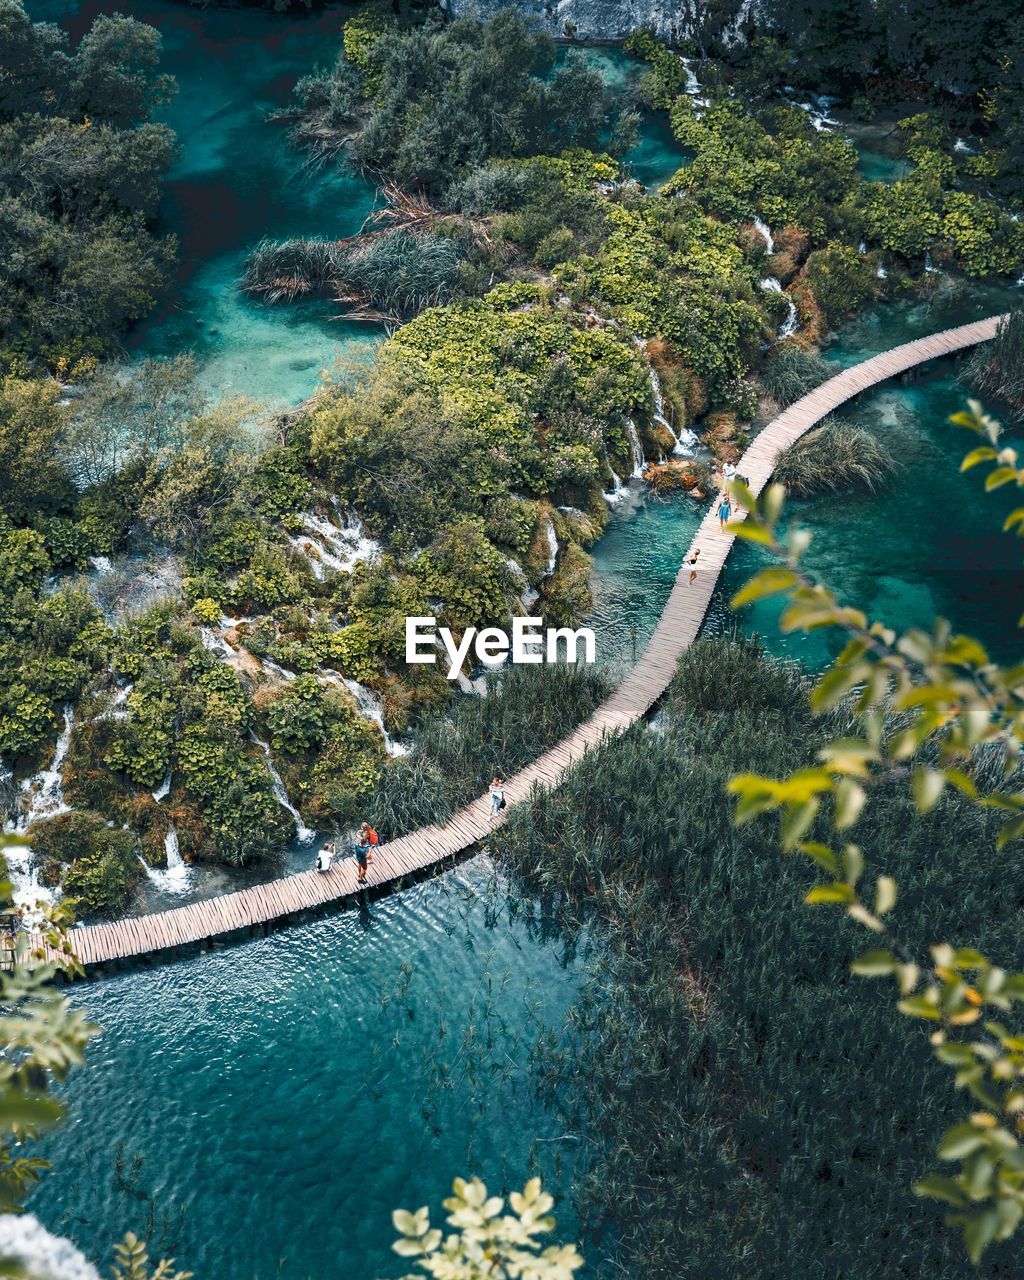 People walk across wooden path over lakes and waterfall at plitvice lakes national park.